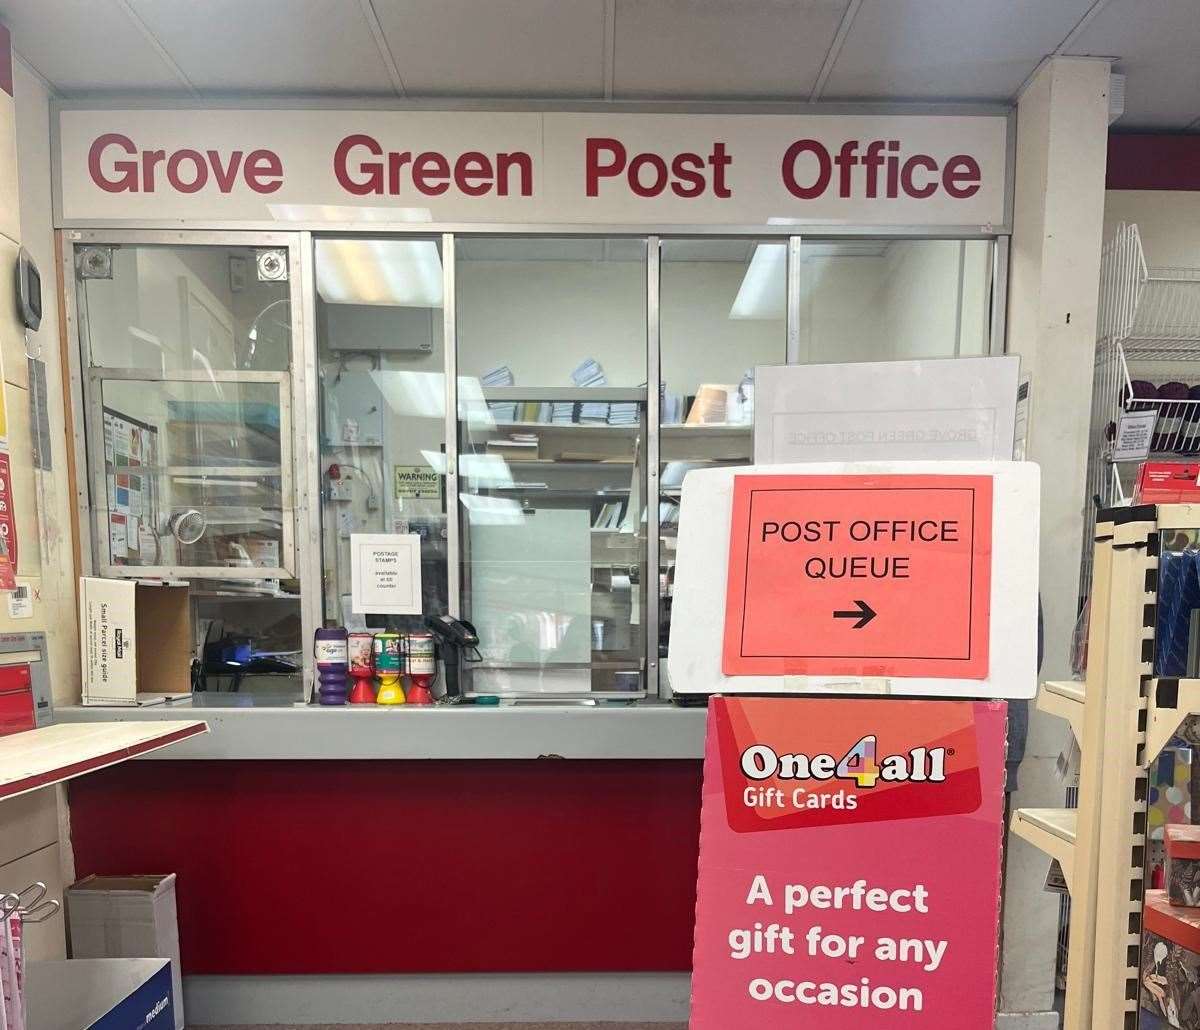 Improvements will be made to the Post Office